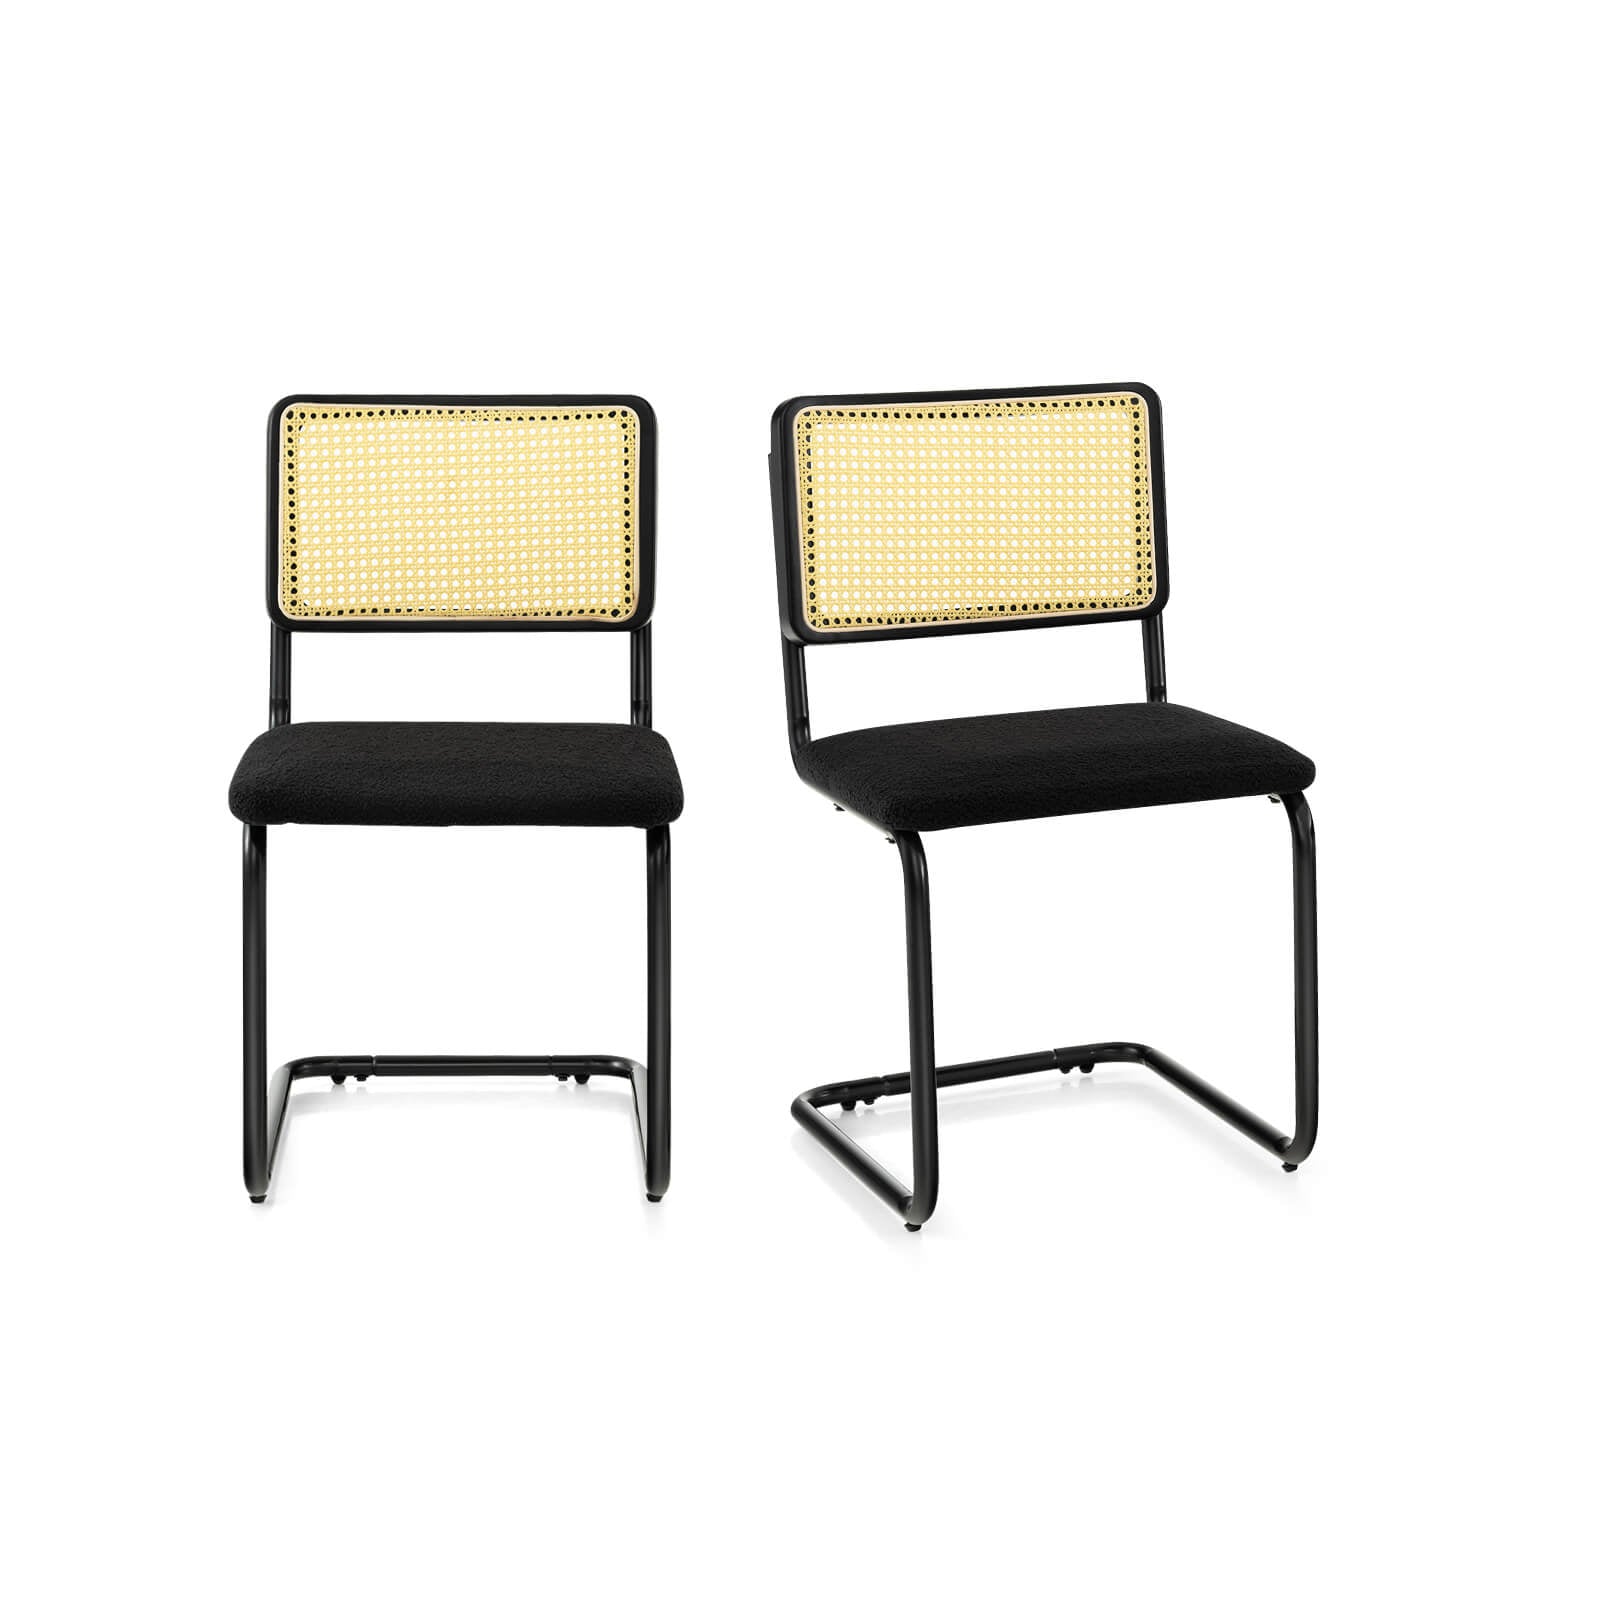 2 Pieces Mid-Century Modern Dining Chair with Cantilever Design-Black